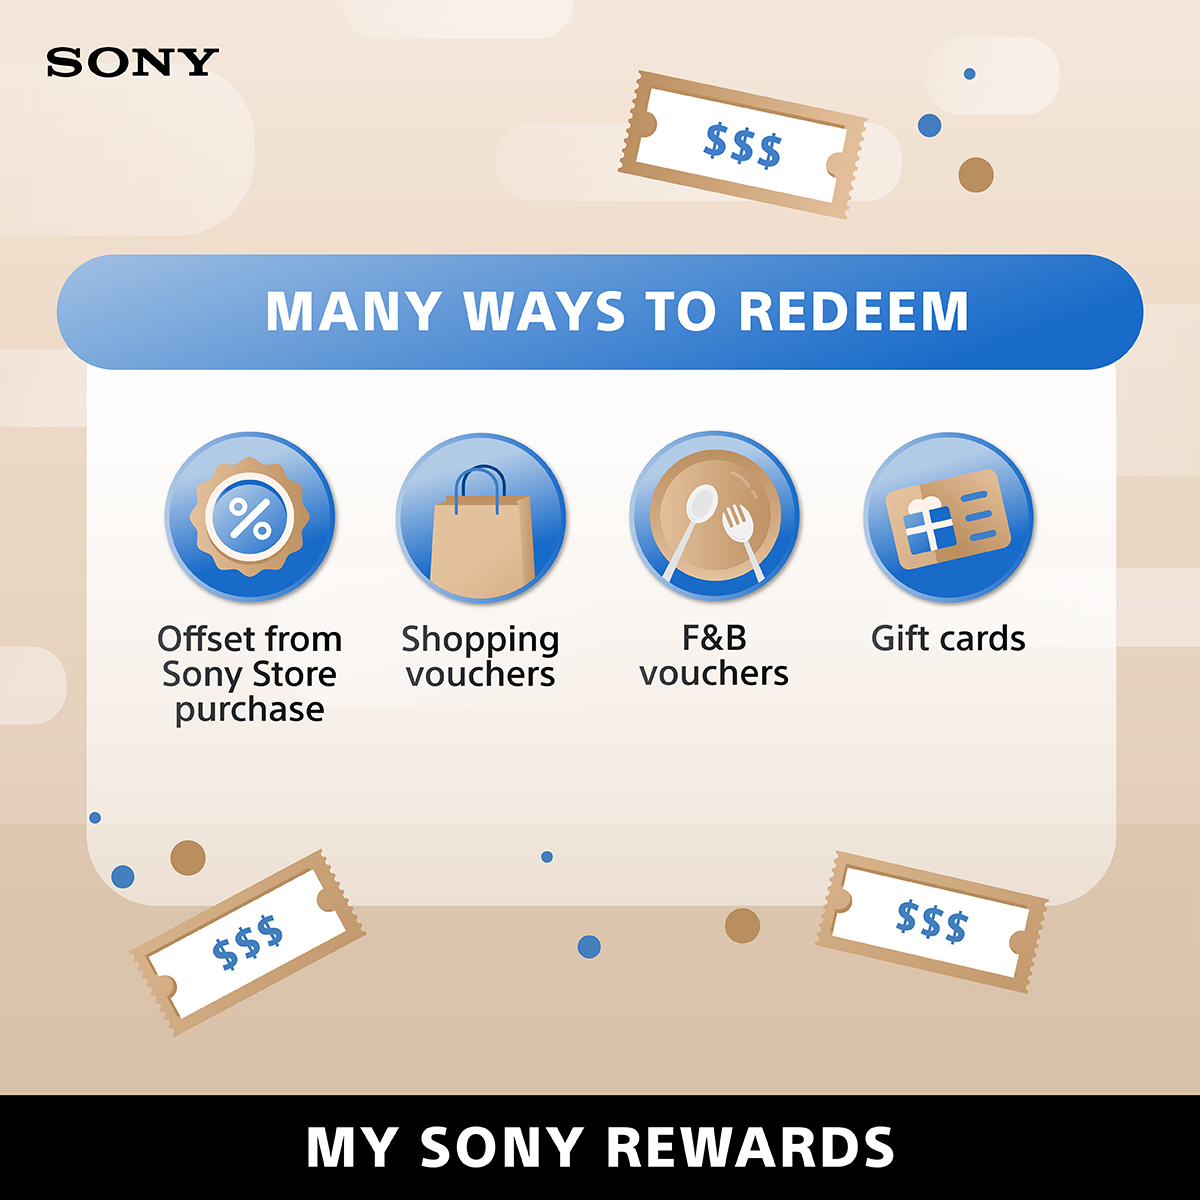 SonyMalaysia tweet picture